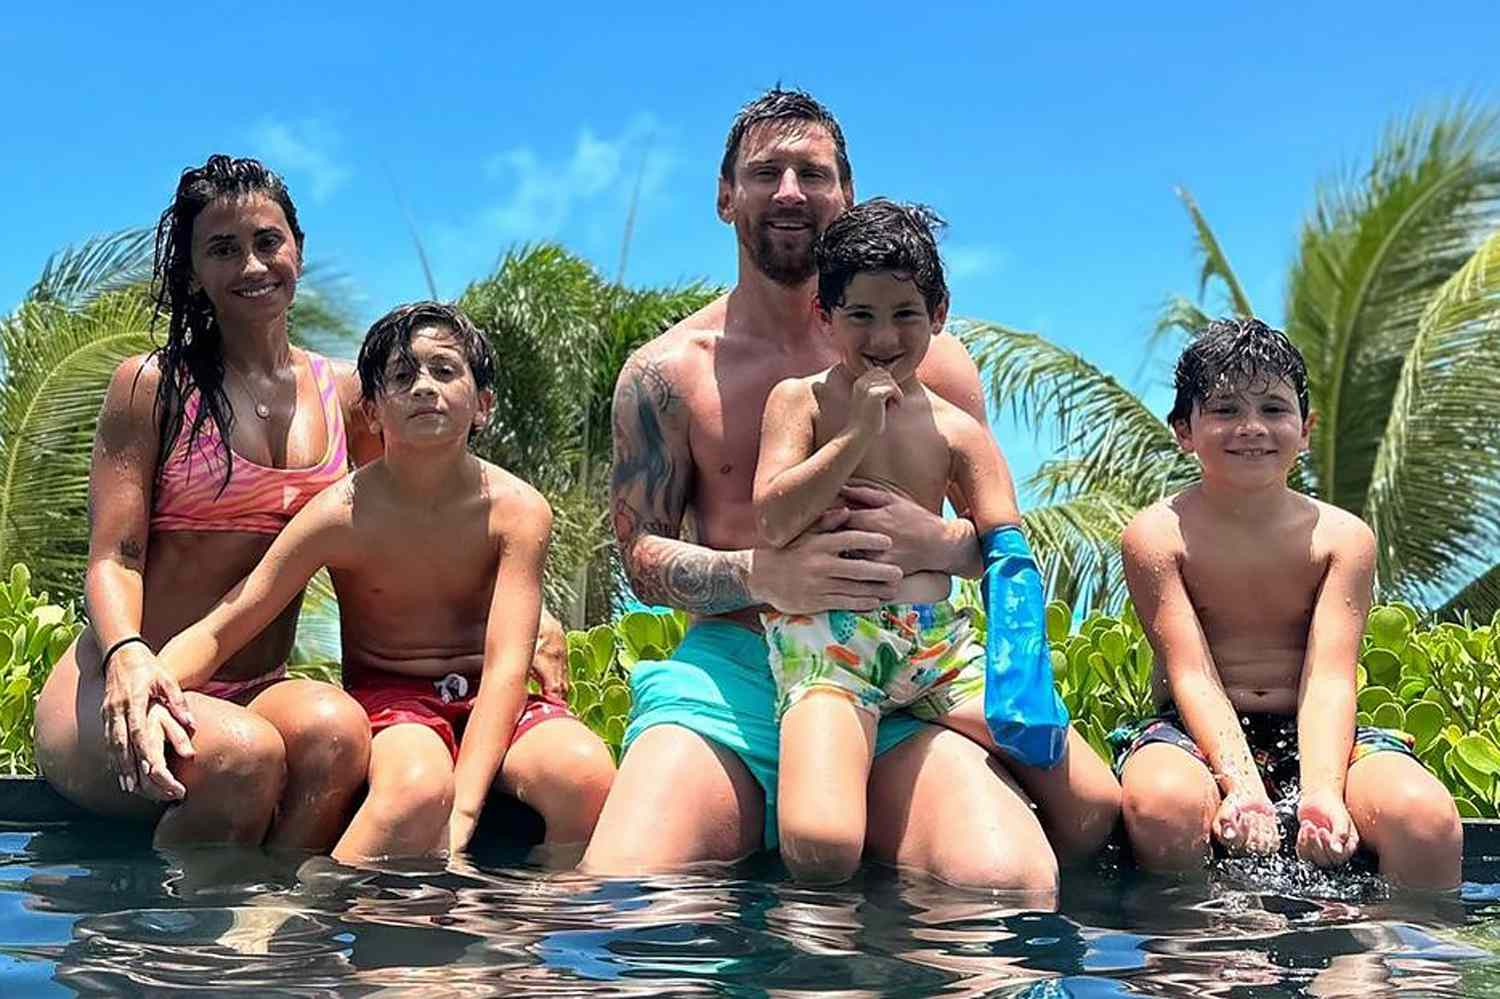 Aguero Thinks It Would Be Harder For Messi's Family In Saudi Arabia Than In Miami